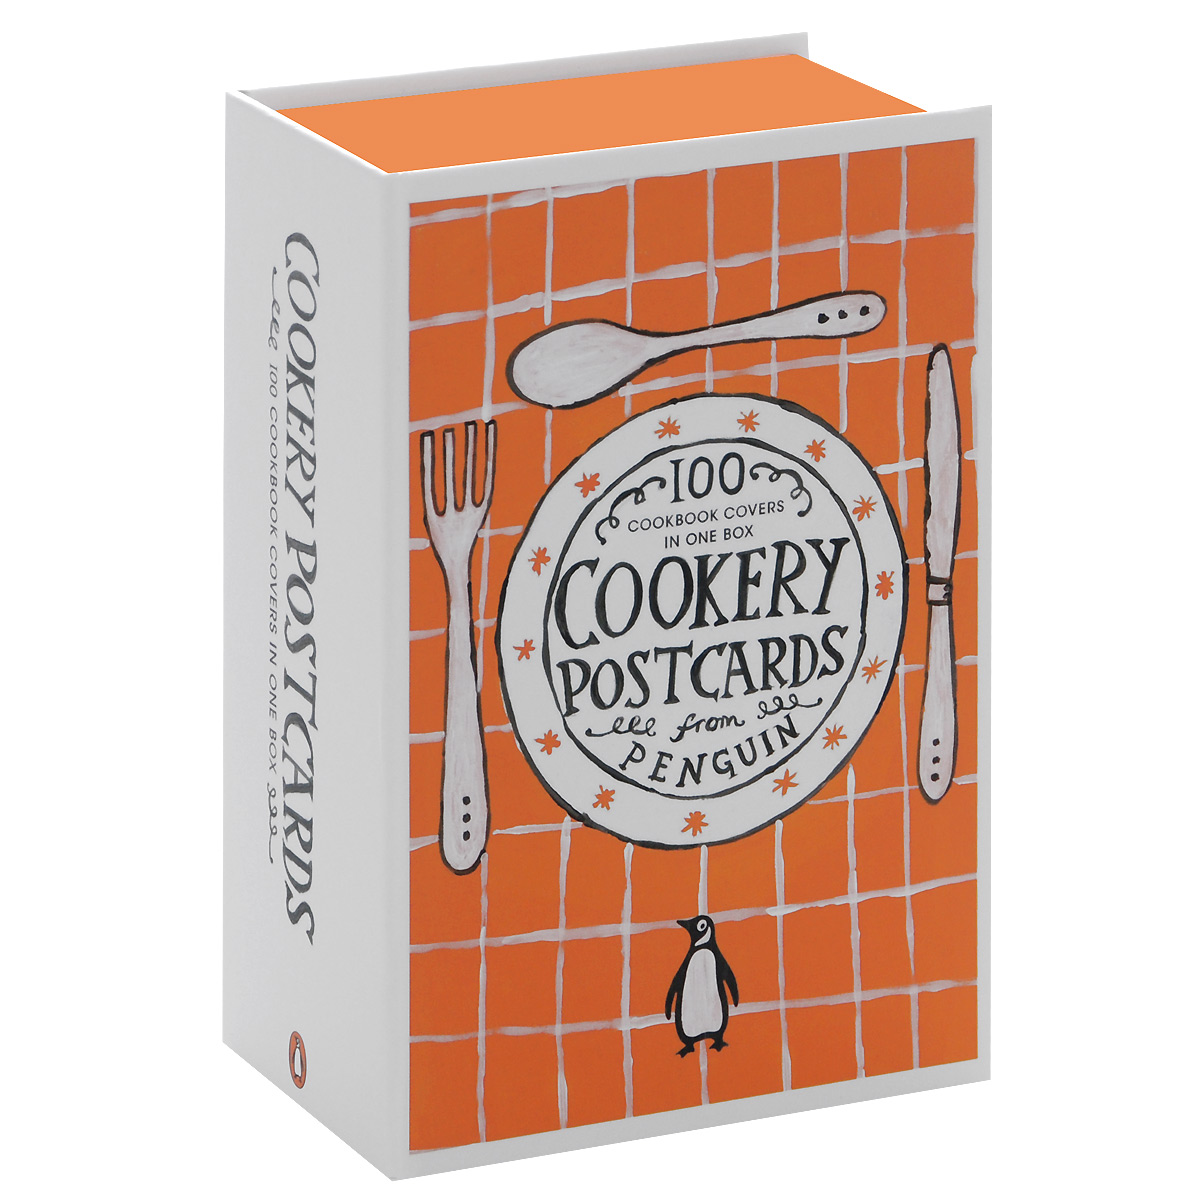 Cookery Postcards: 100 Cookbook Covers in One Box